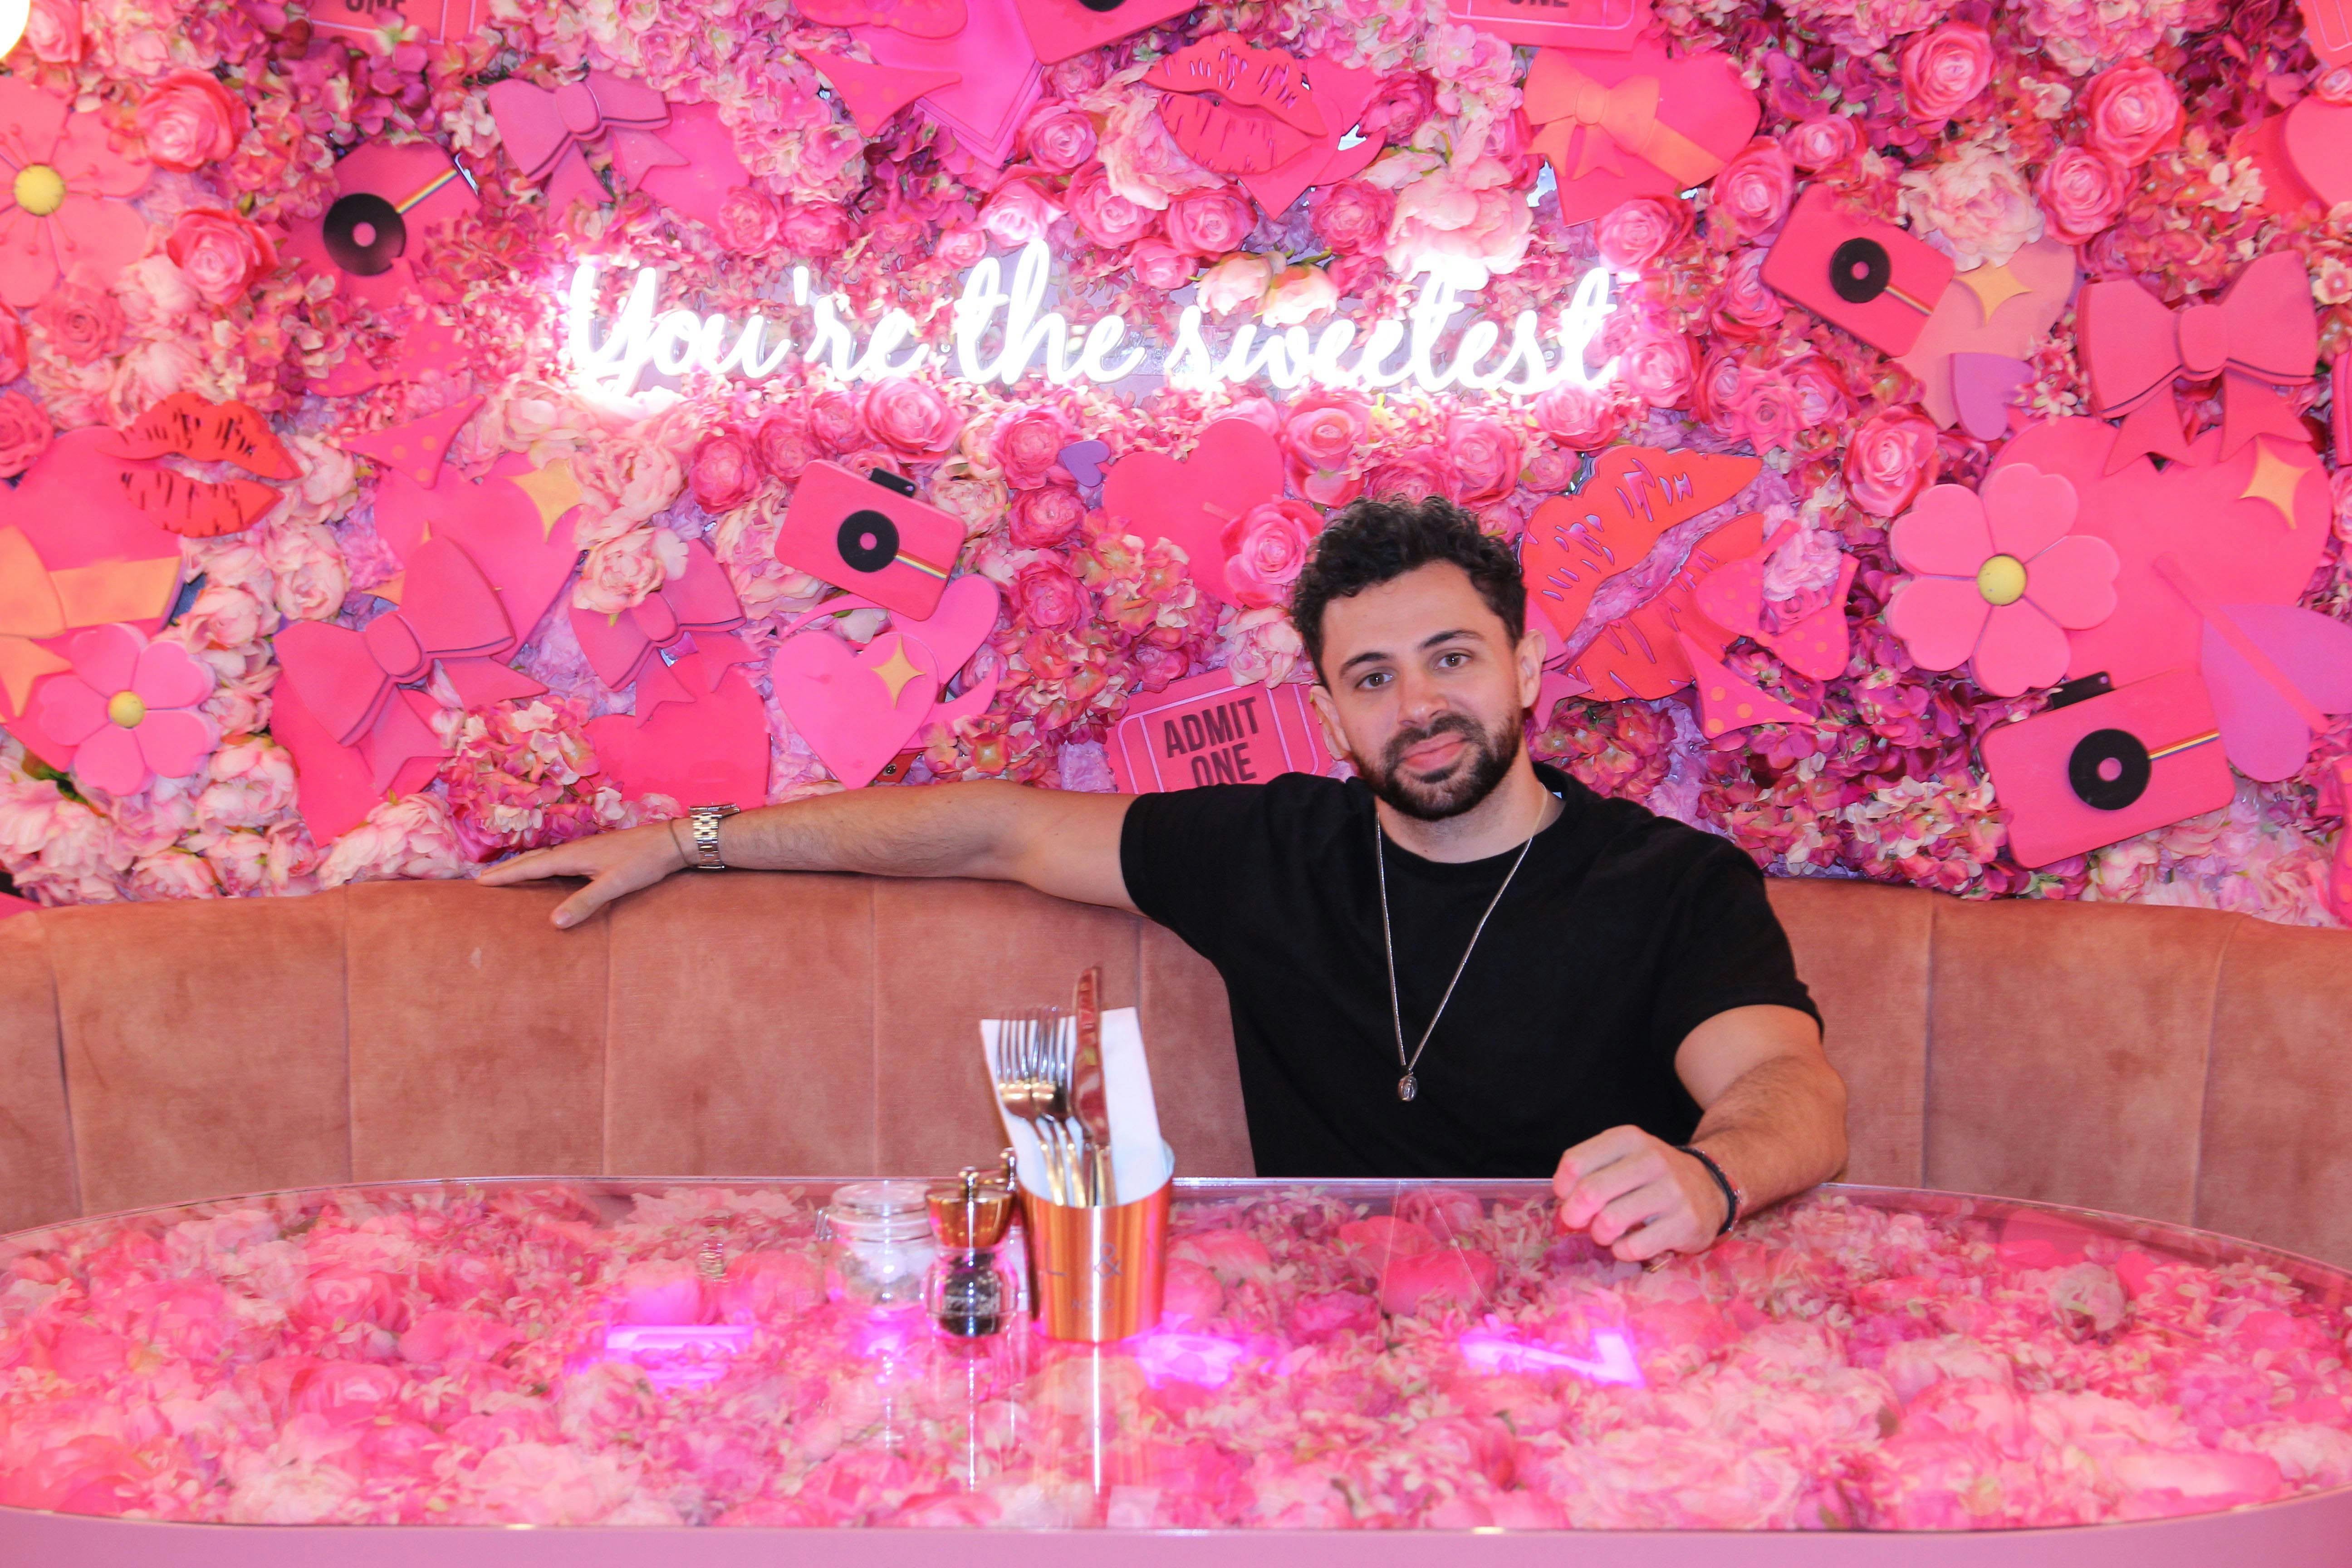 A man in a black shirt sits with his arm across the back of a booth, with a pink flowered table and matching wall with the words "You're the sweetest" written in glowing cursive